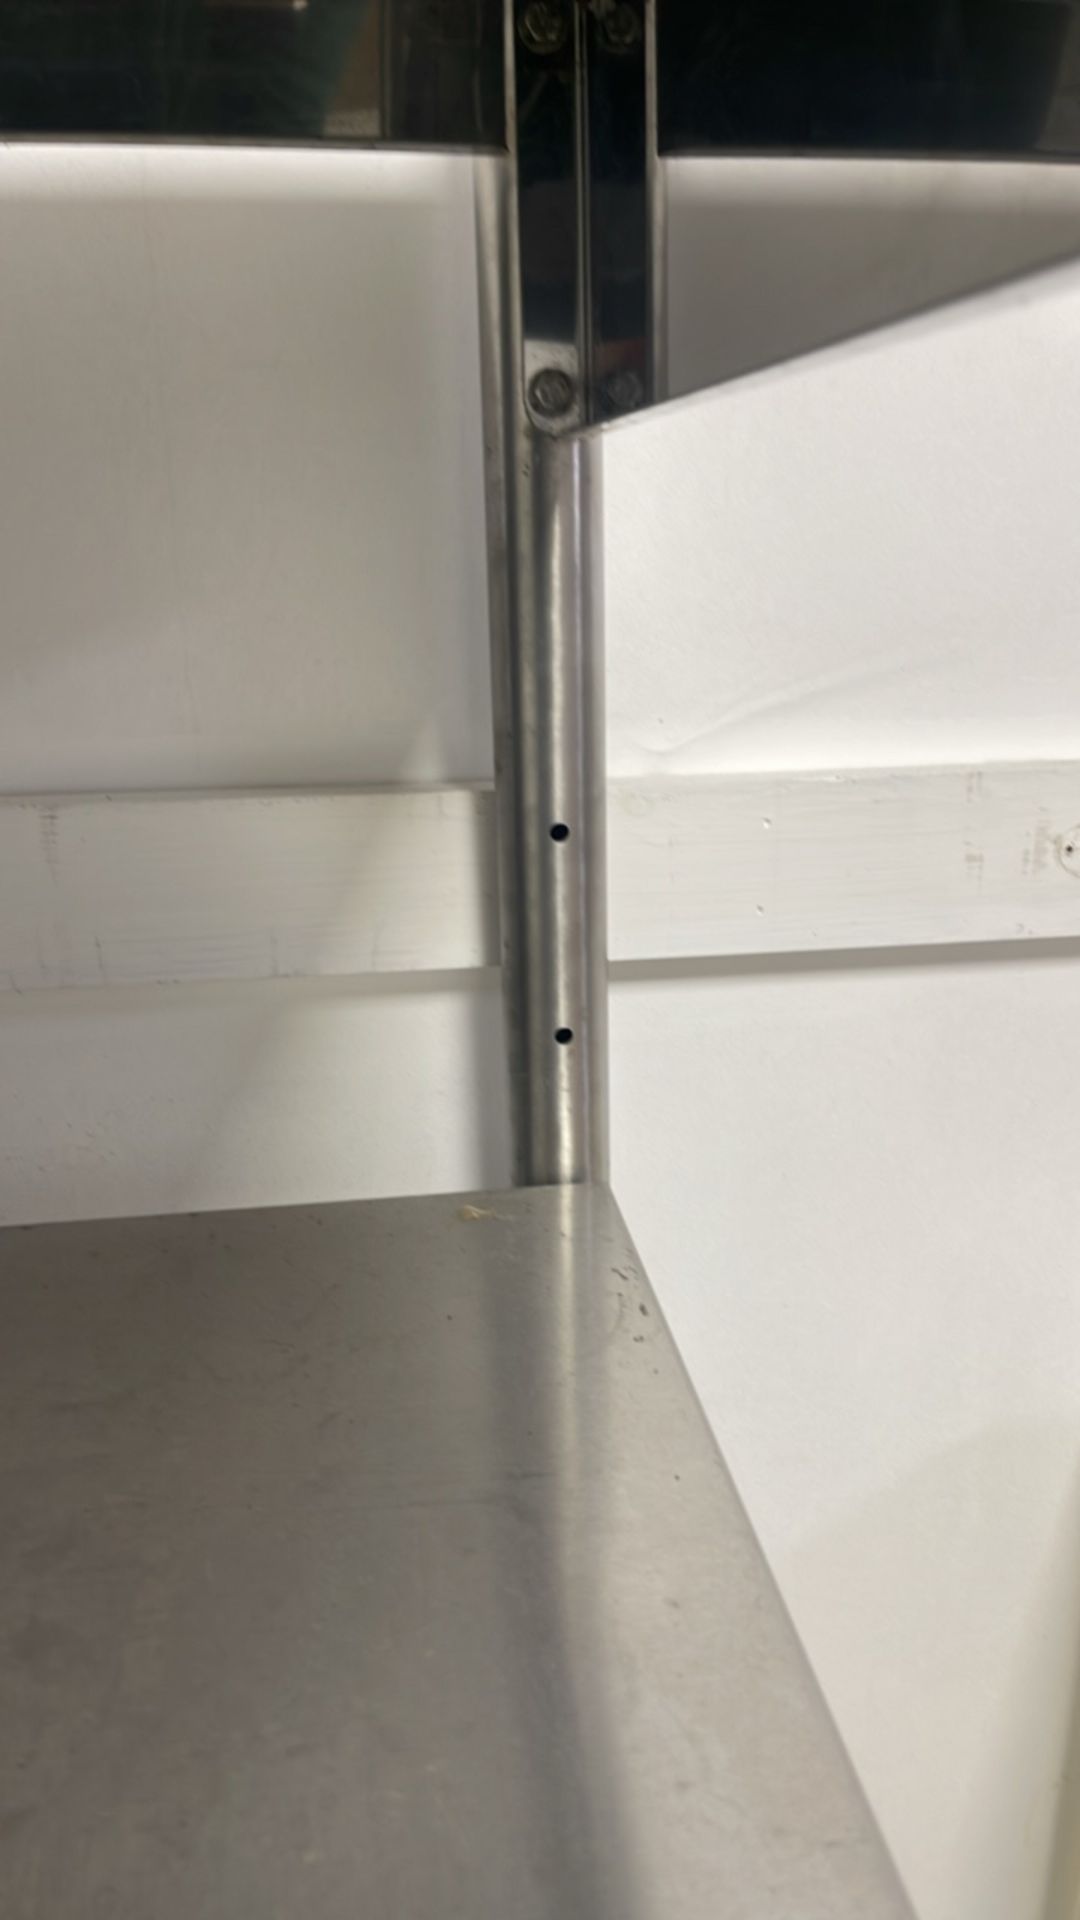 4 Shelve Stainless Steel Unit - Image 3 of 5